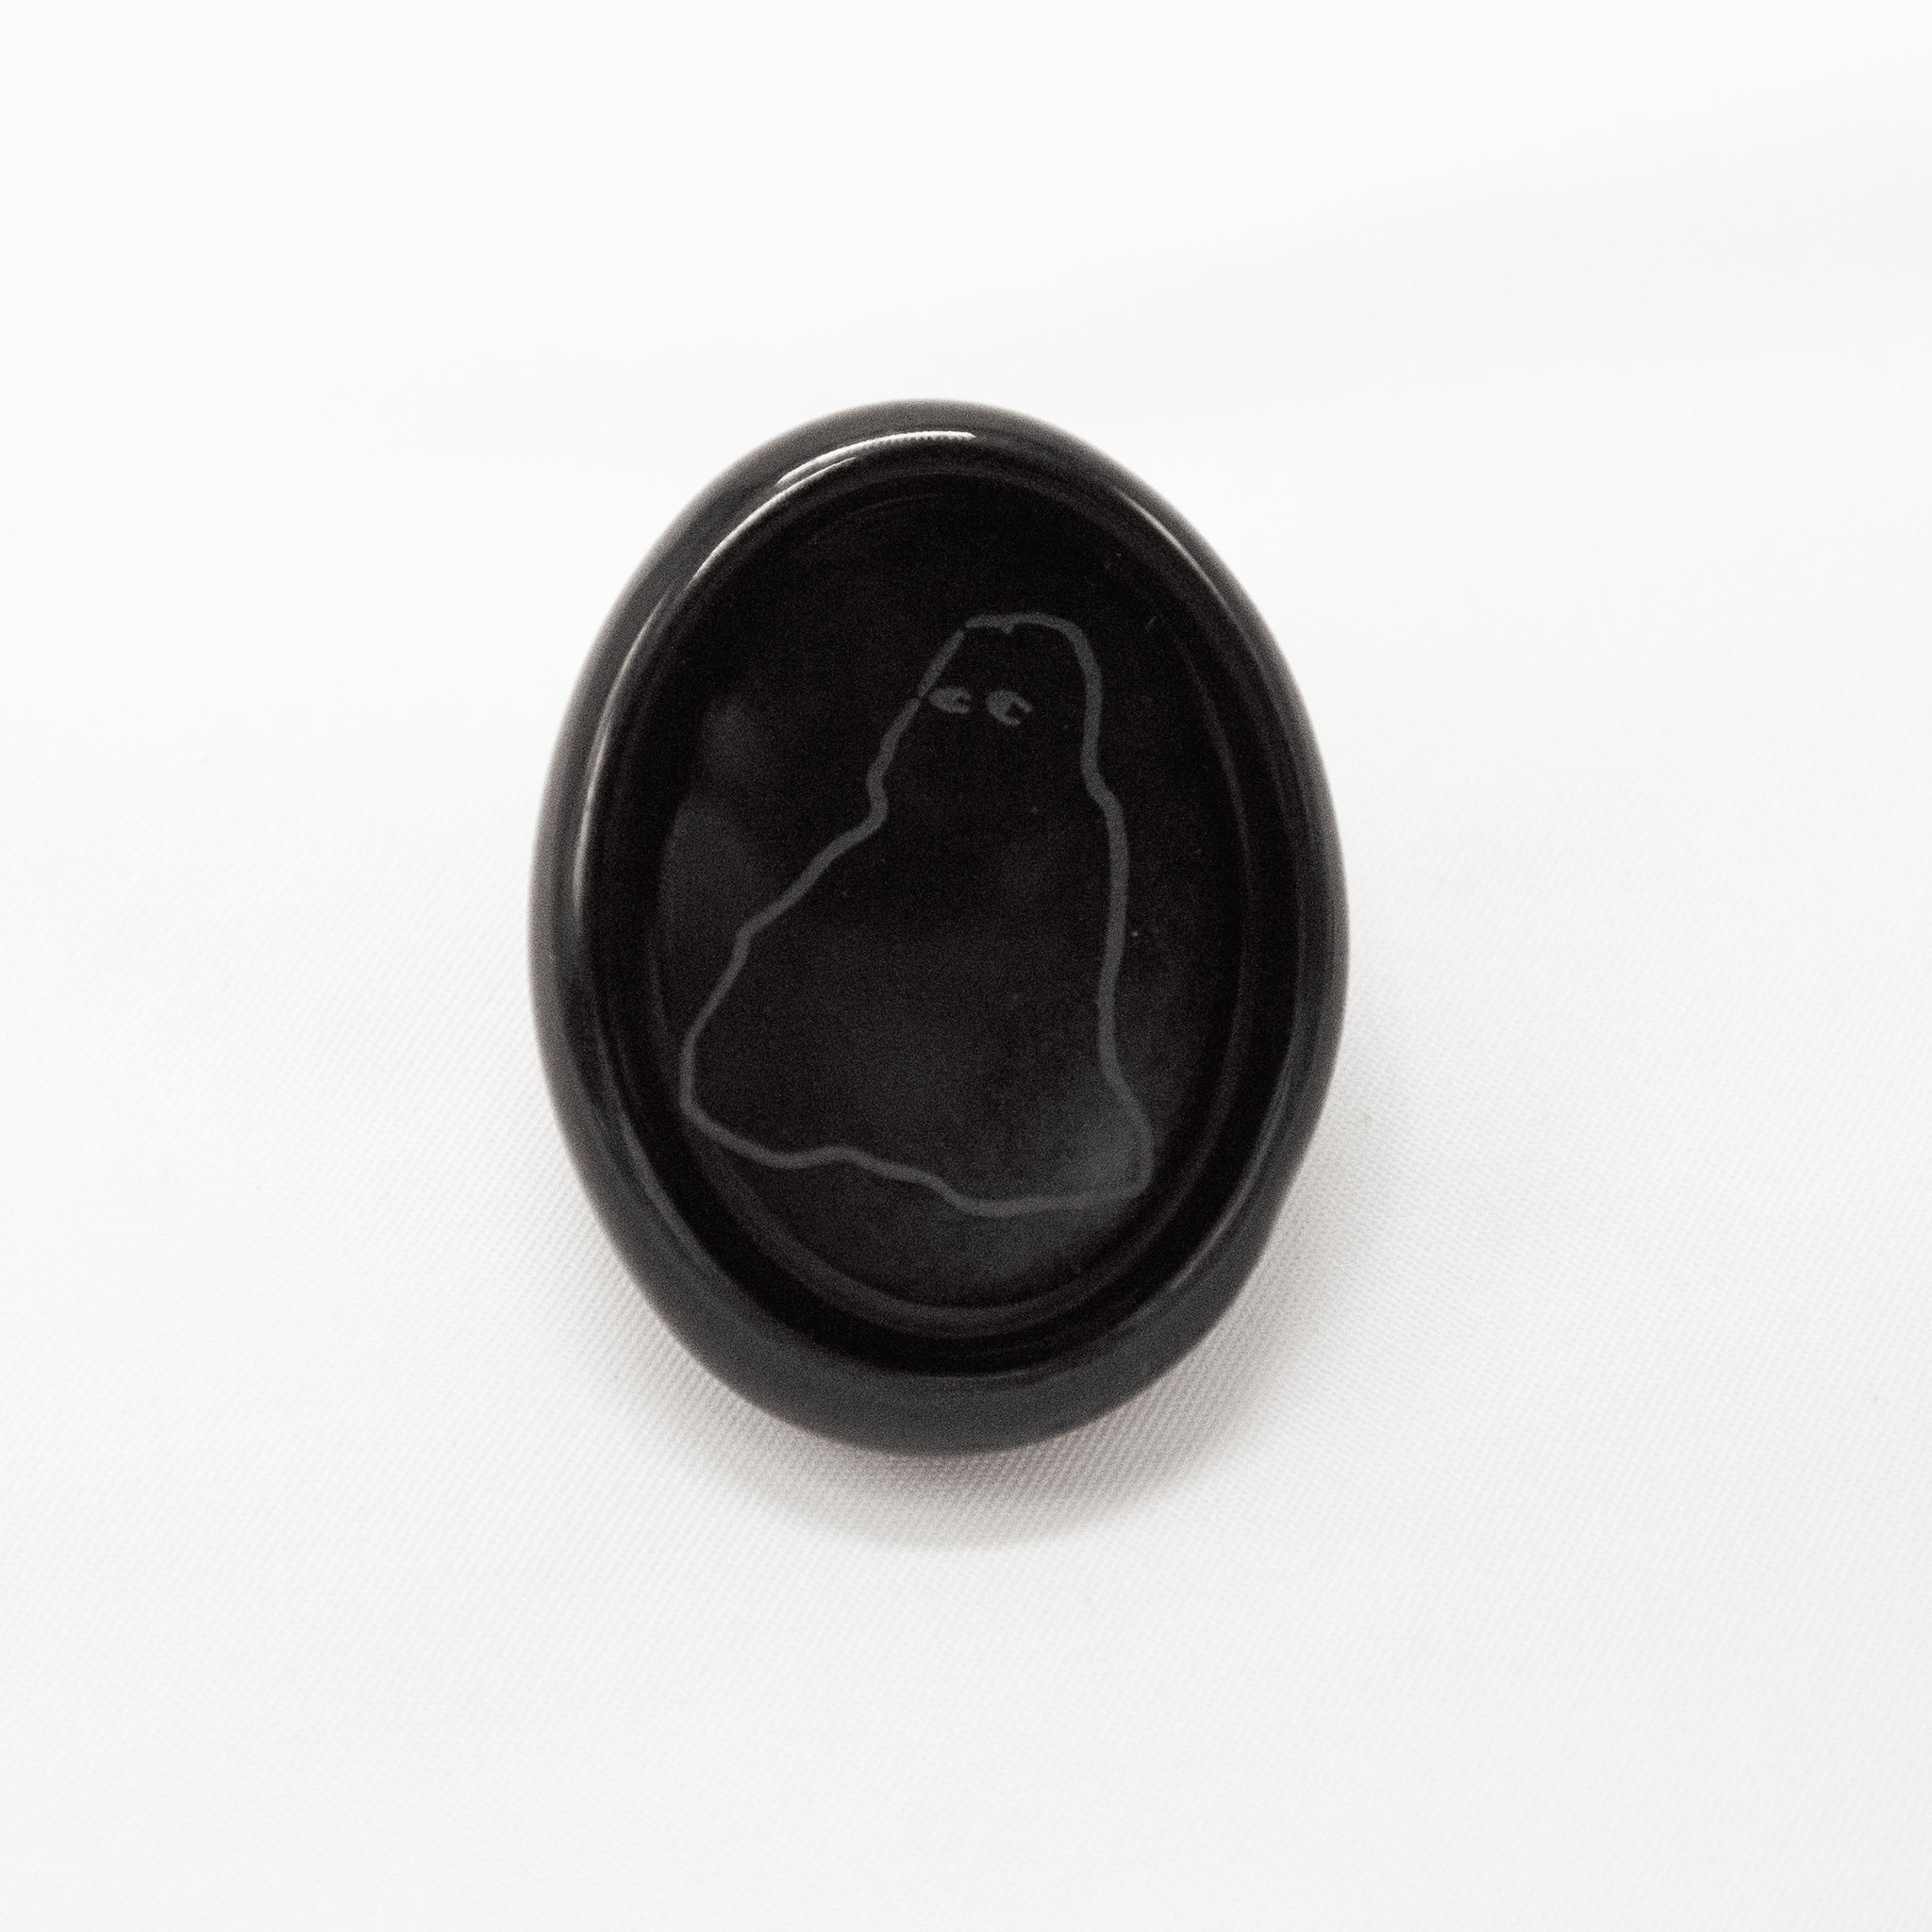 Looking Rock Worry Stone x Marina Abramovic Other Third Drawer Down USA 